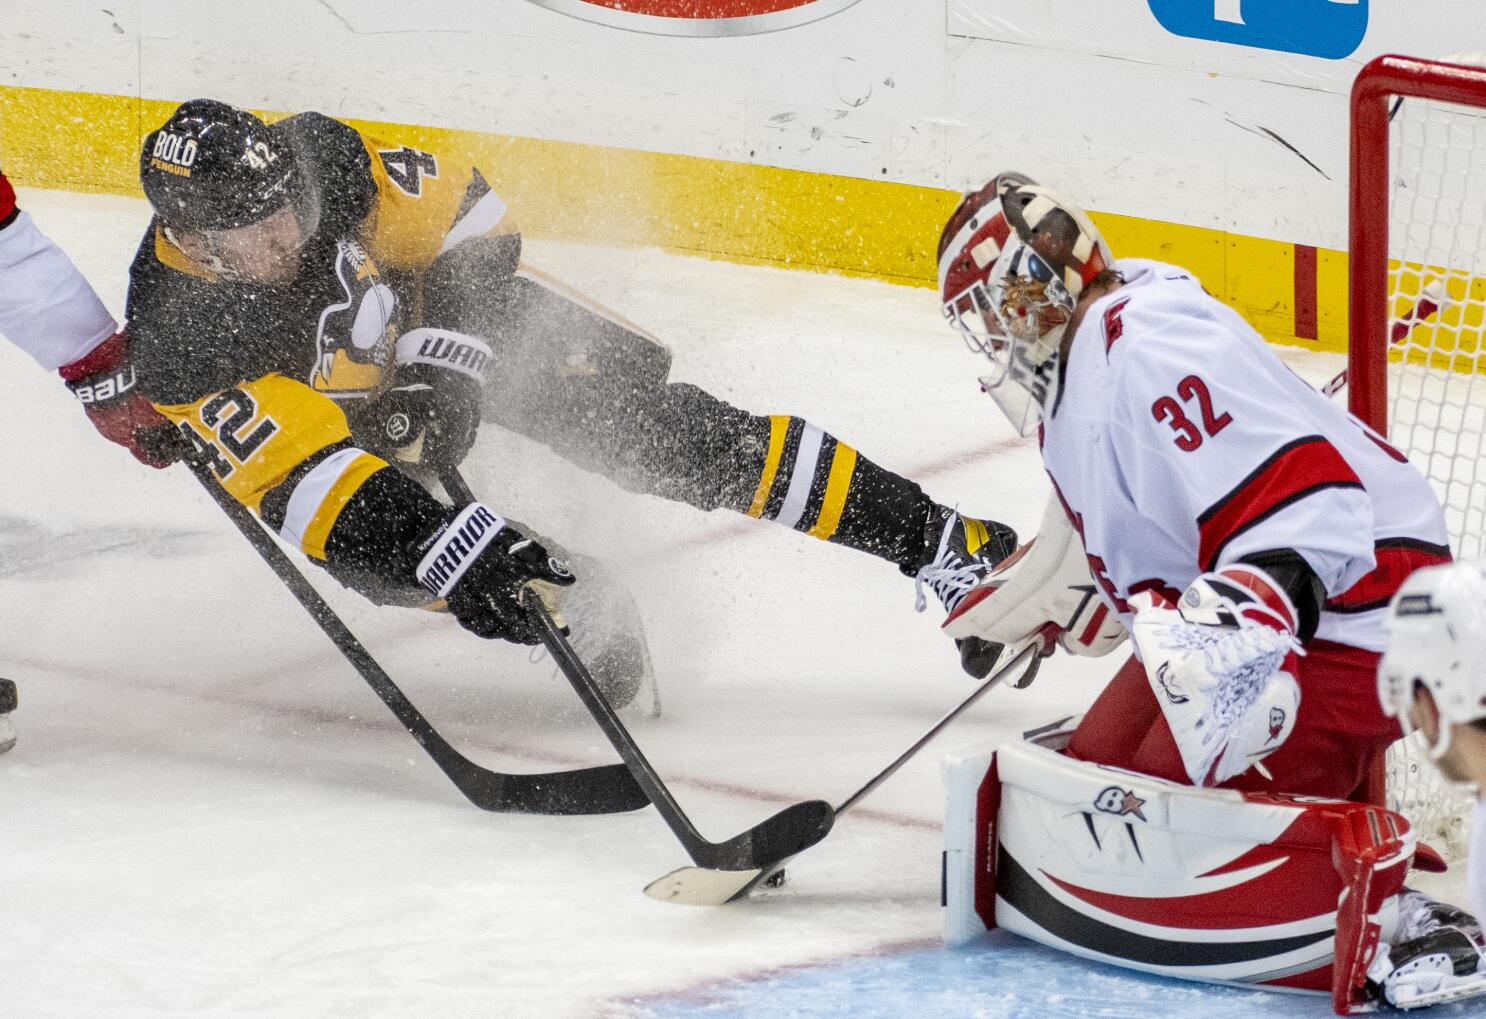 Marc-Andre Fleury makes 32 saves, Penguins beat Canadiens 3-1 - Montreal